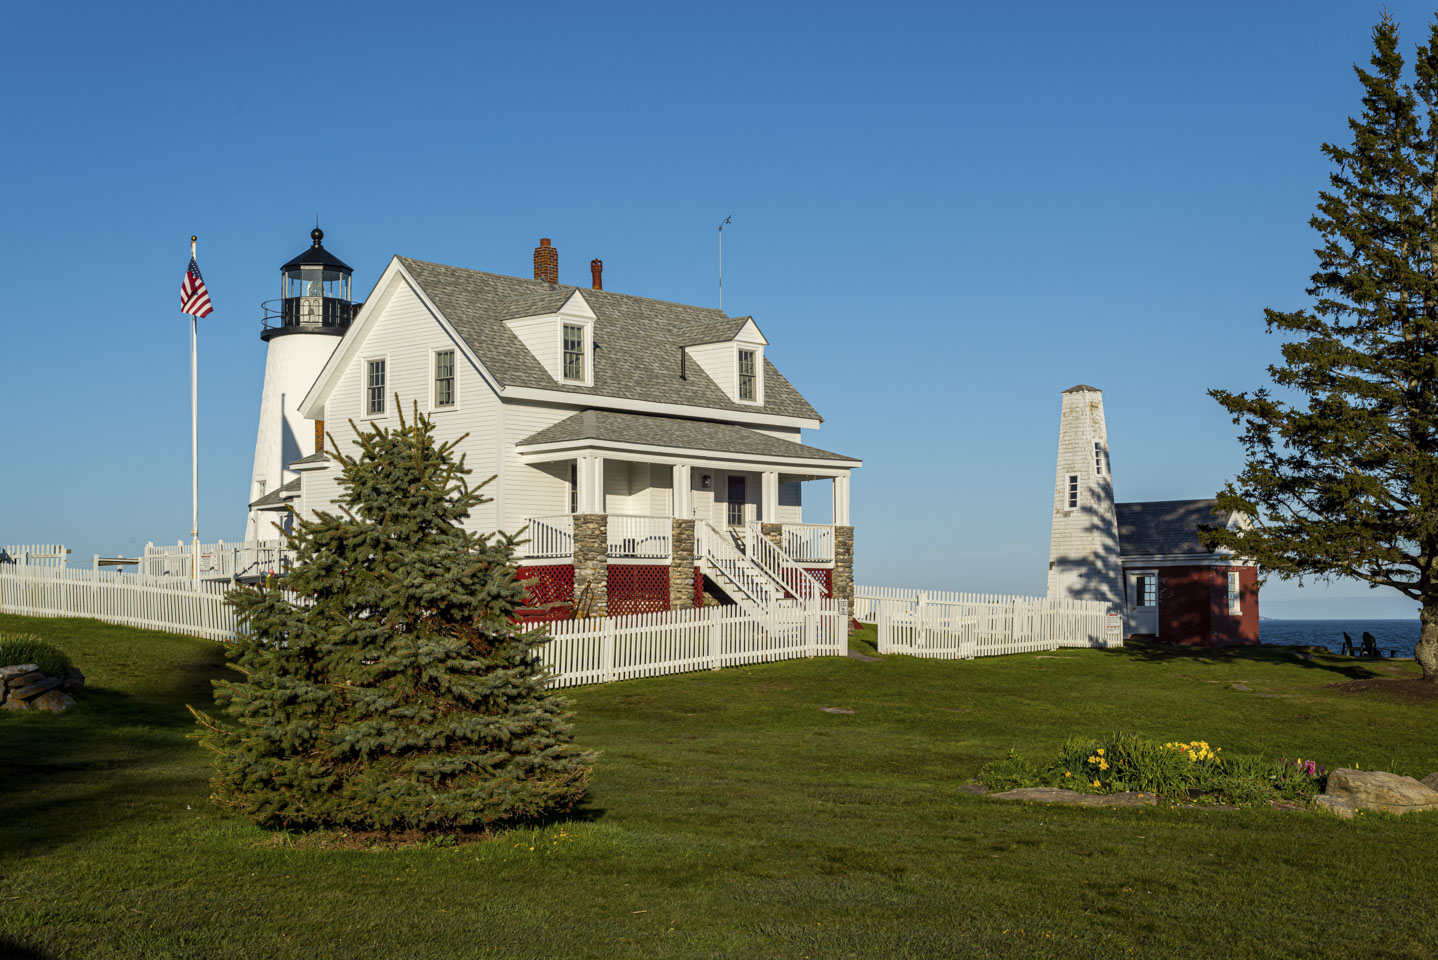 Pemaquid Lighthouse and foghorn